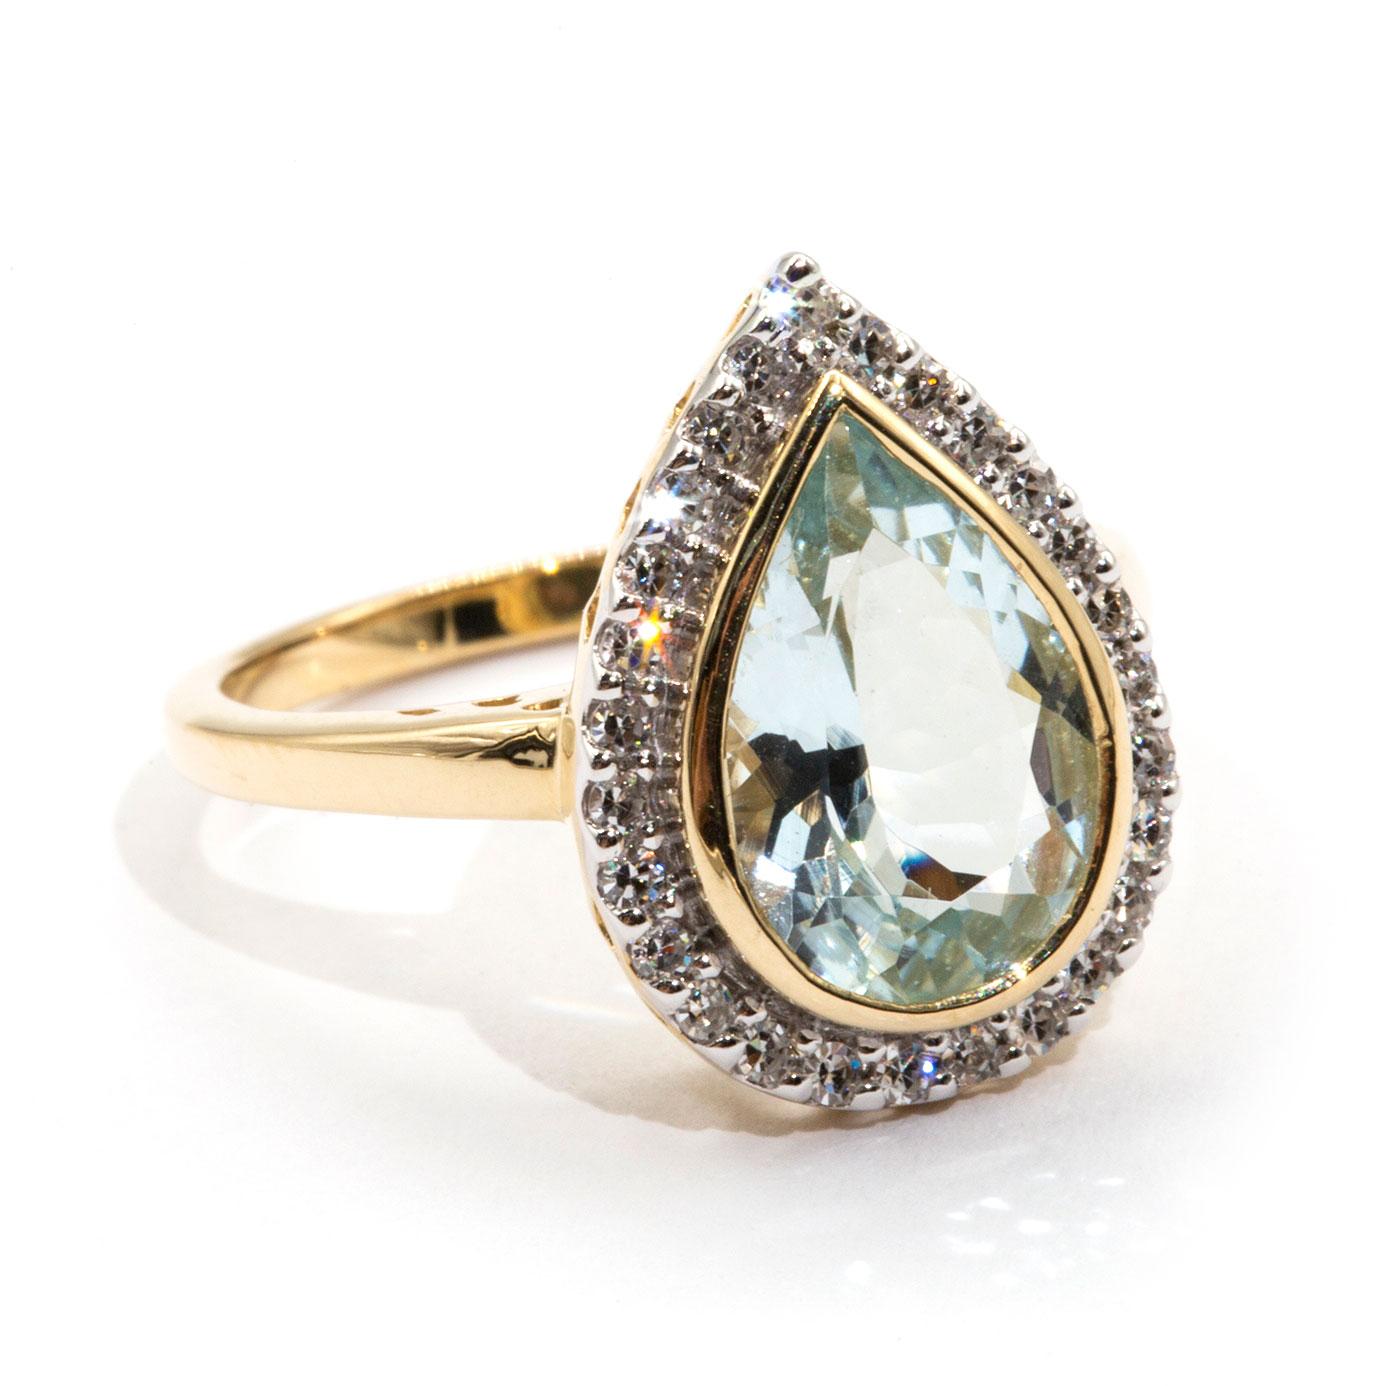 Made in 9 carat yellow gold is this breathtaking vintage inspired Lacey Ring that boasts a romantic pear cut 2.62 carat bright light blue Aquamarine encompassed by a gorgeous halo border of carefully claw set round diamonds. We have name this